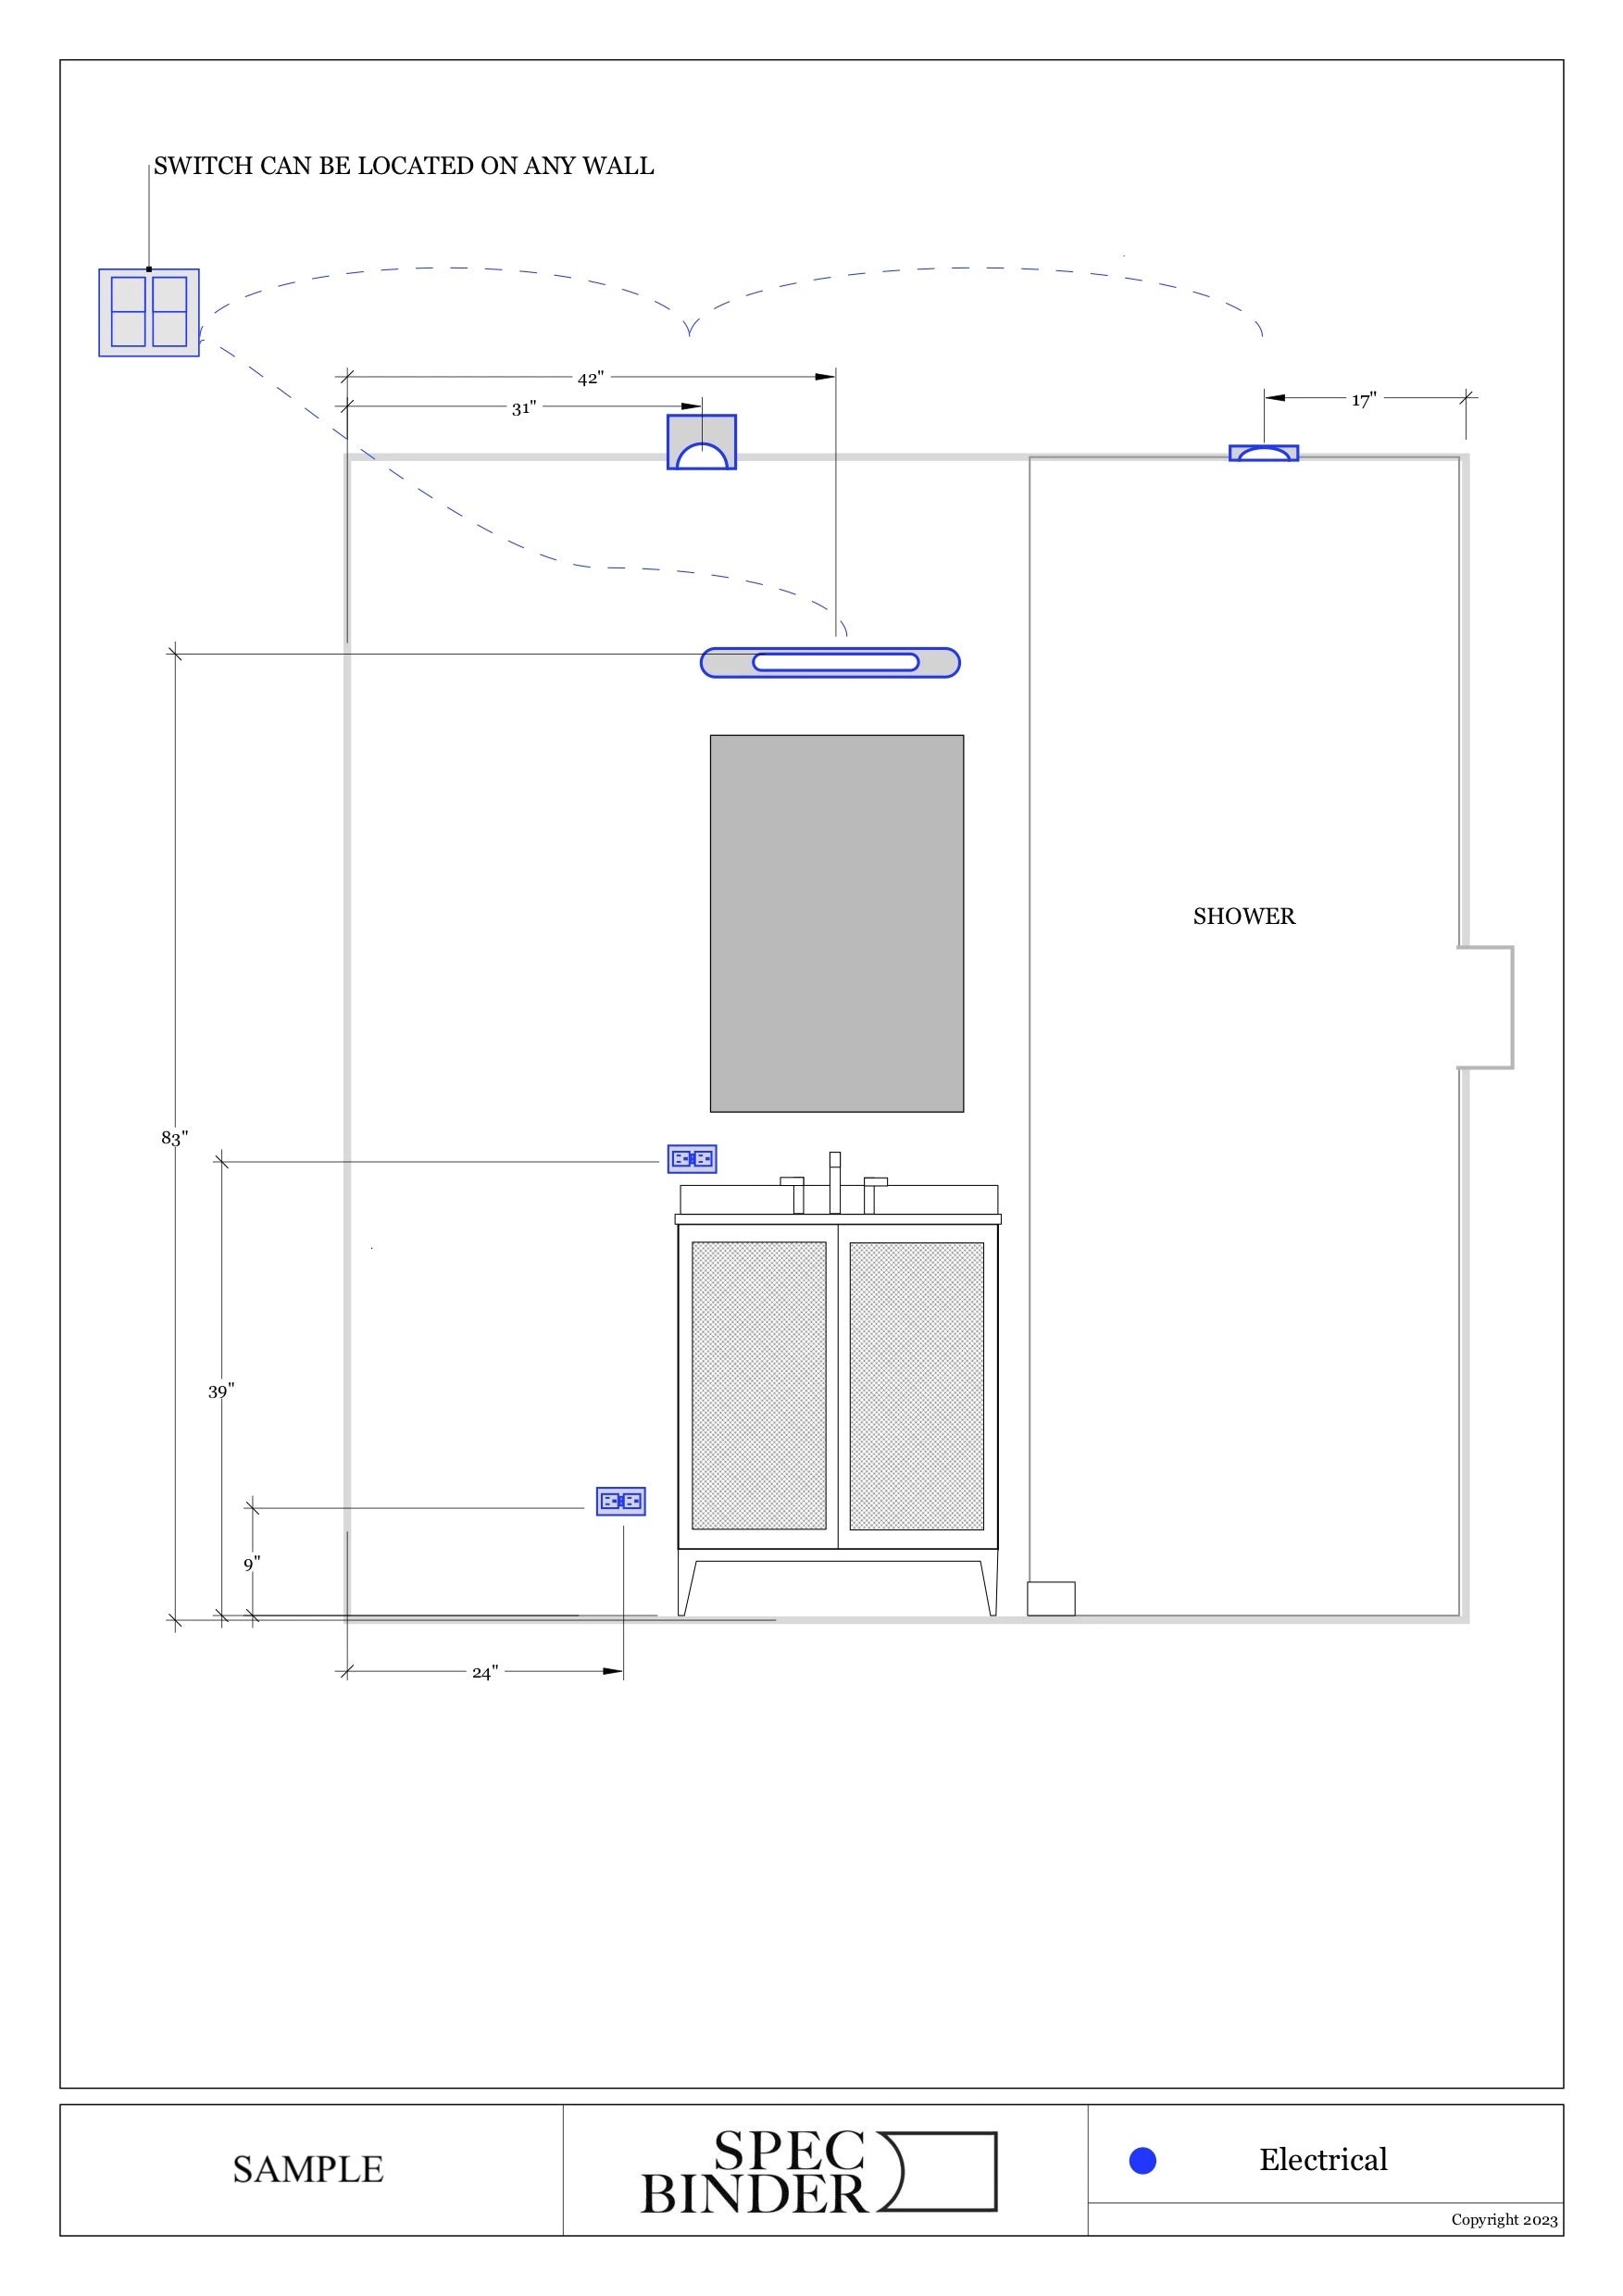 Sample sub-contractor-specific installation sheets. Example of electrician installation sheet or wall elevation for a bathroom